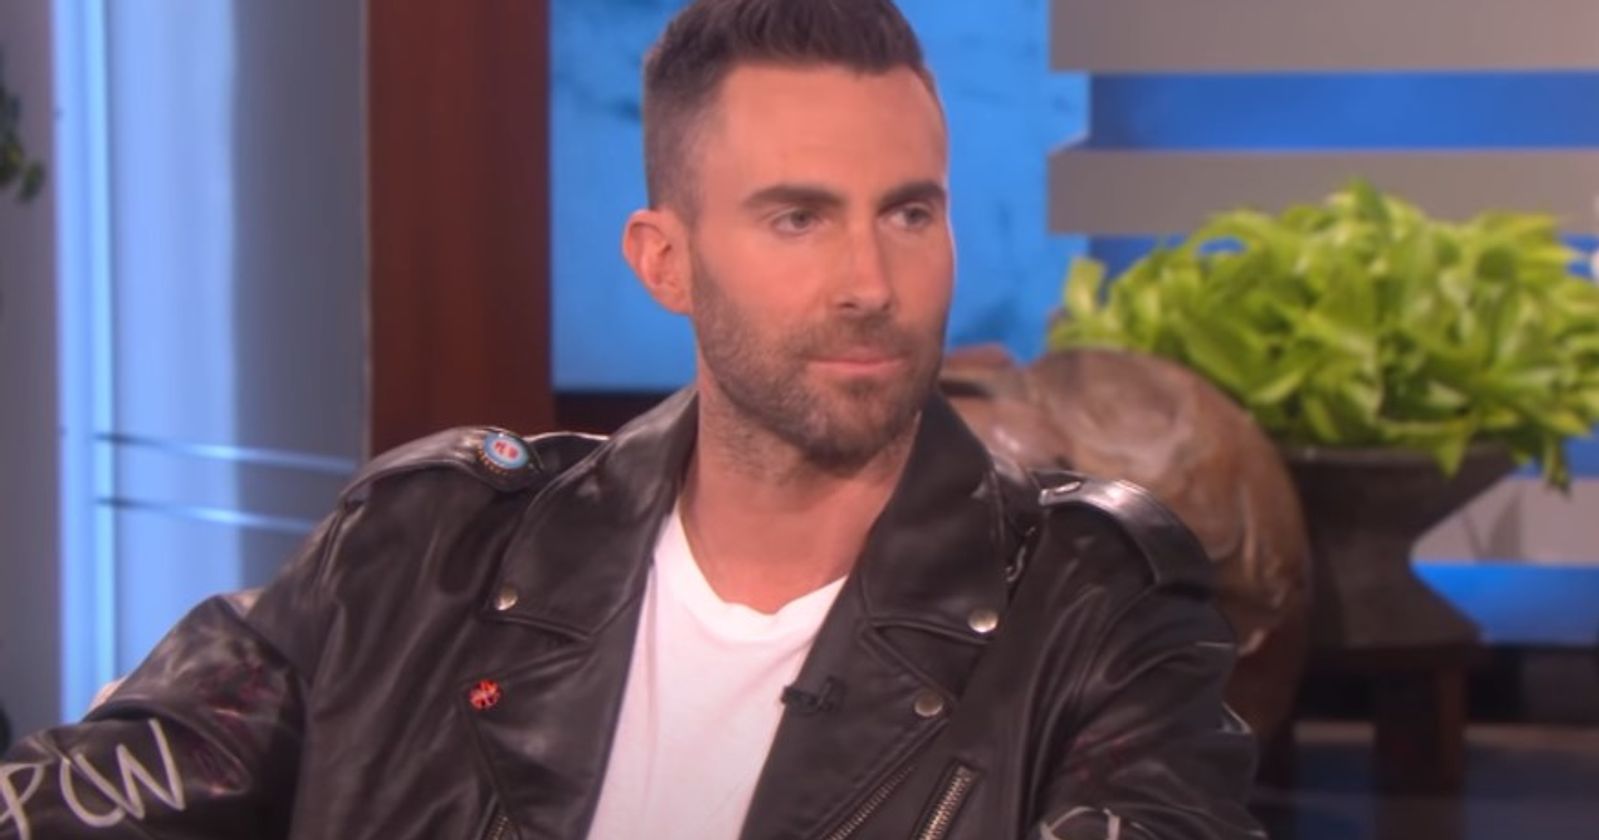 Adam Levine Net Worth: How Wealthy Is The Maroon 5 Vocalist?